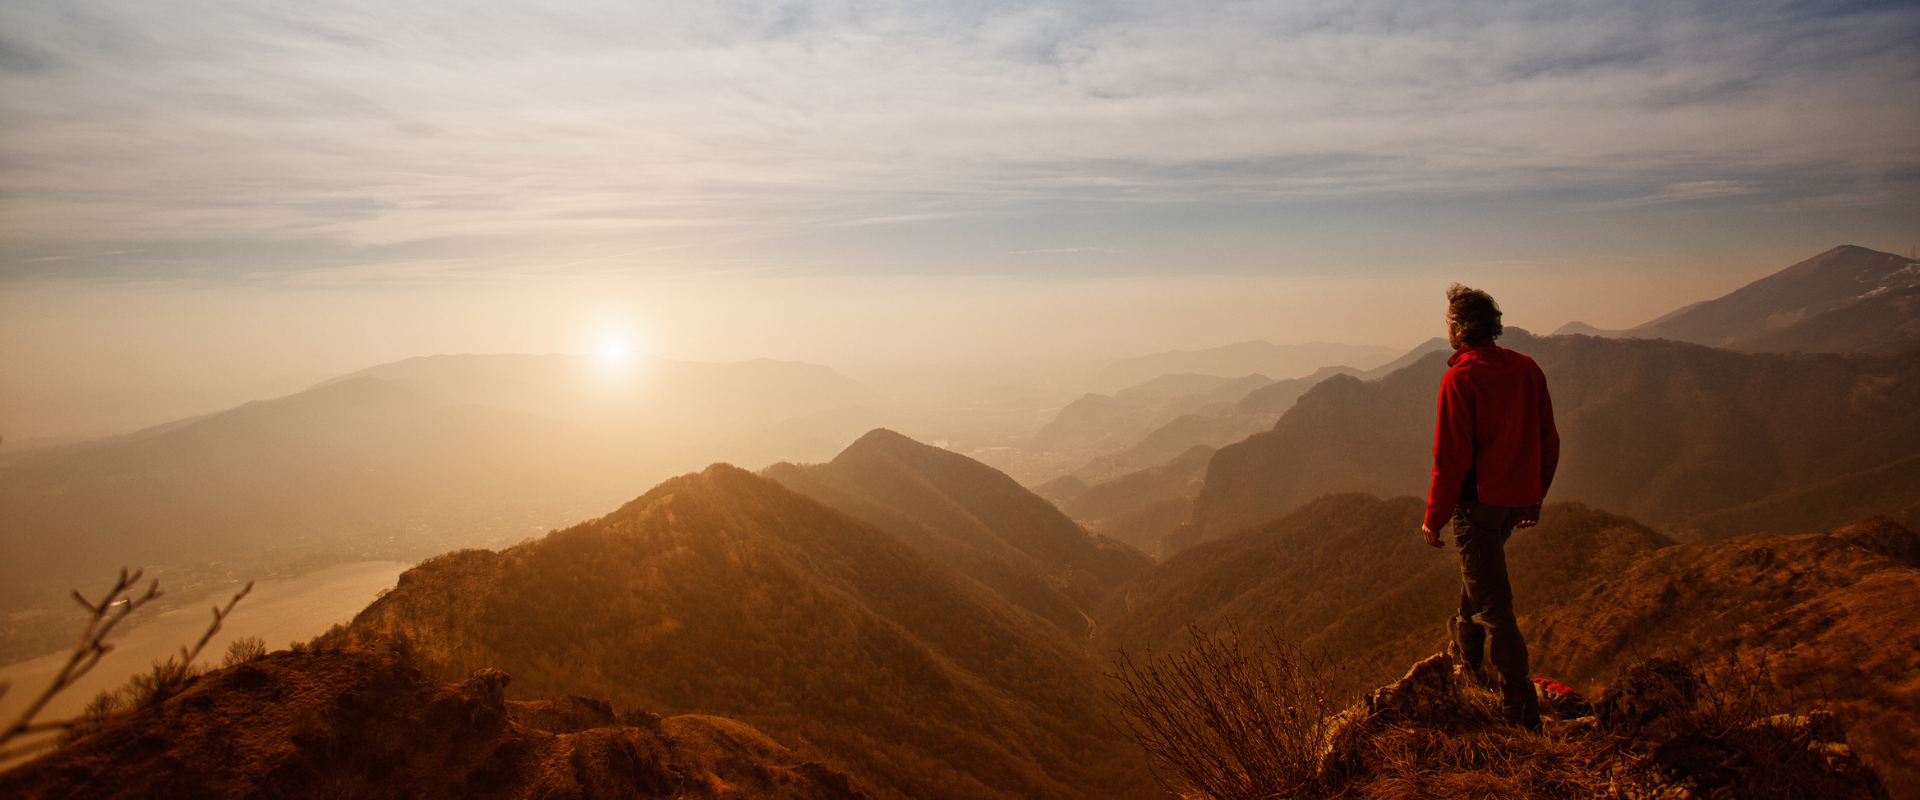 Man stands on mountain looking at sunrise